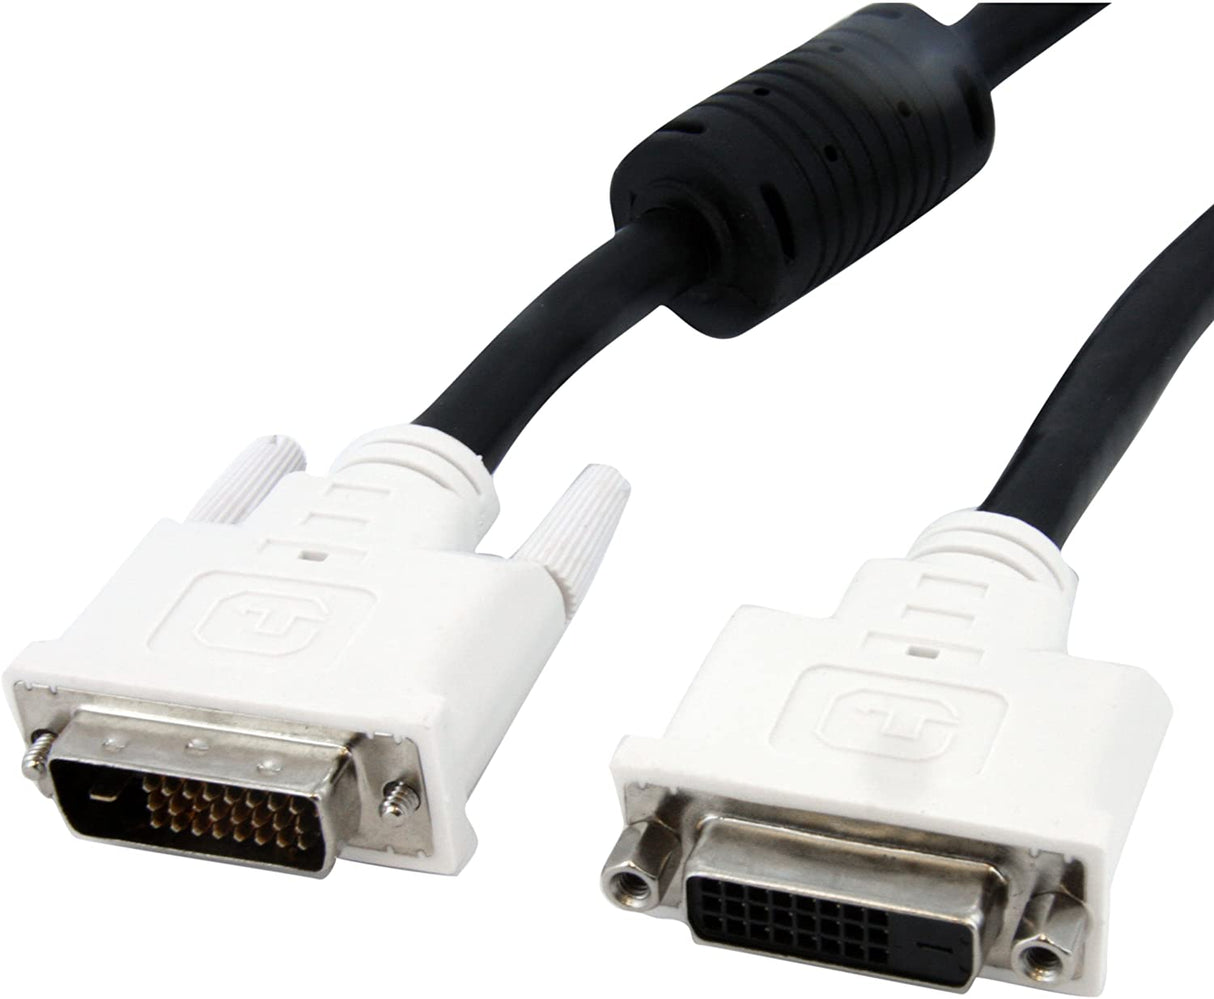 StarTech.com DVI Extension Cable - 10 ft - Dual Link - Male to Female Cable - 2560x1600 - DVI-D Cable - Computer Monitor Cable - DVI Cord (DVIDDMF10) 10 ft / 3m